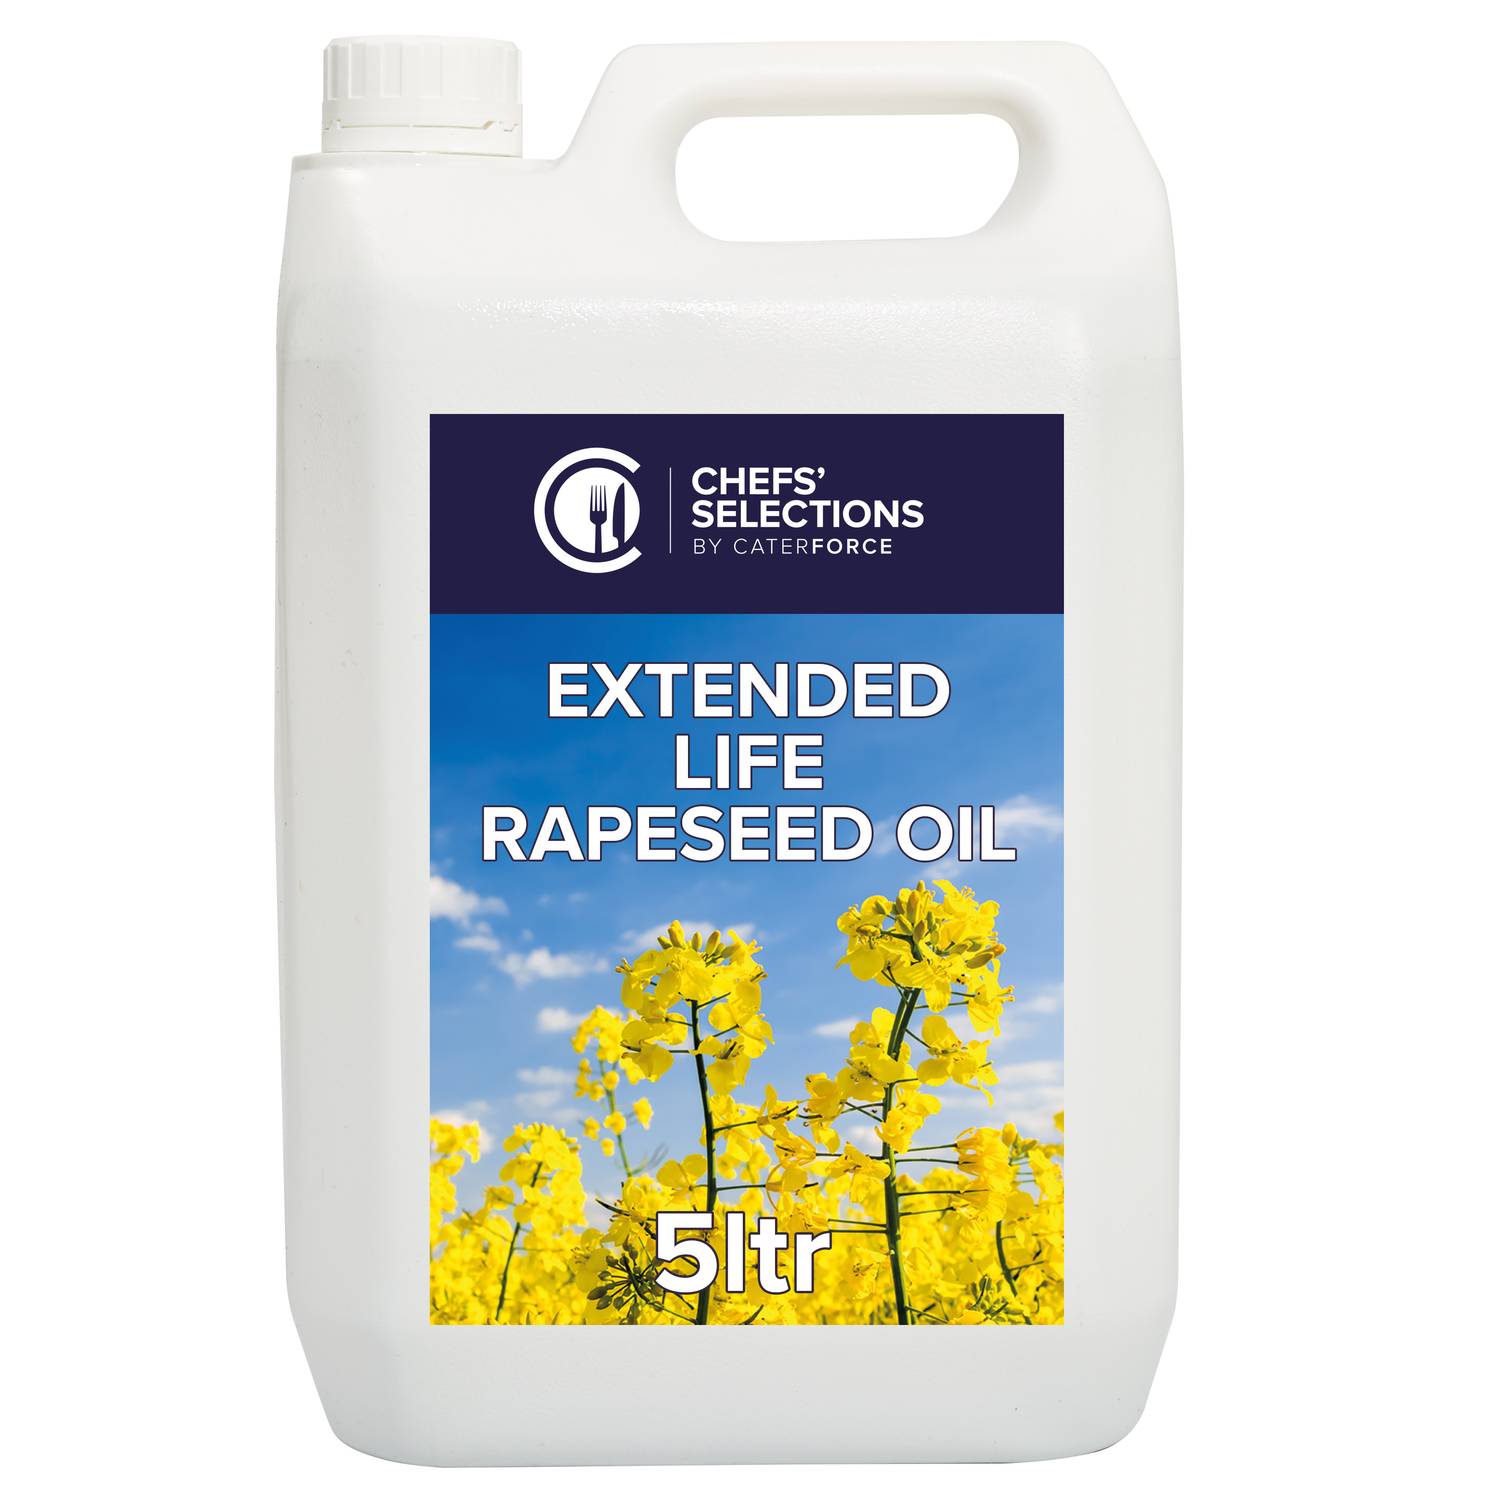 Chefs’ Selections Extended Life Rapeseed Oil (4 x 5L)